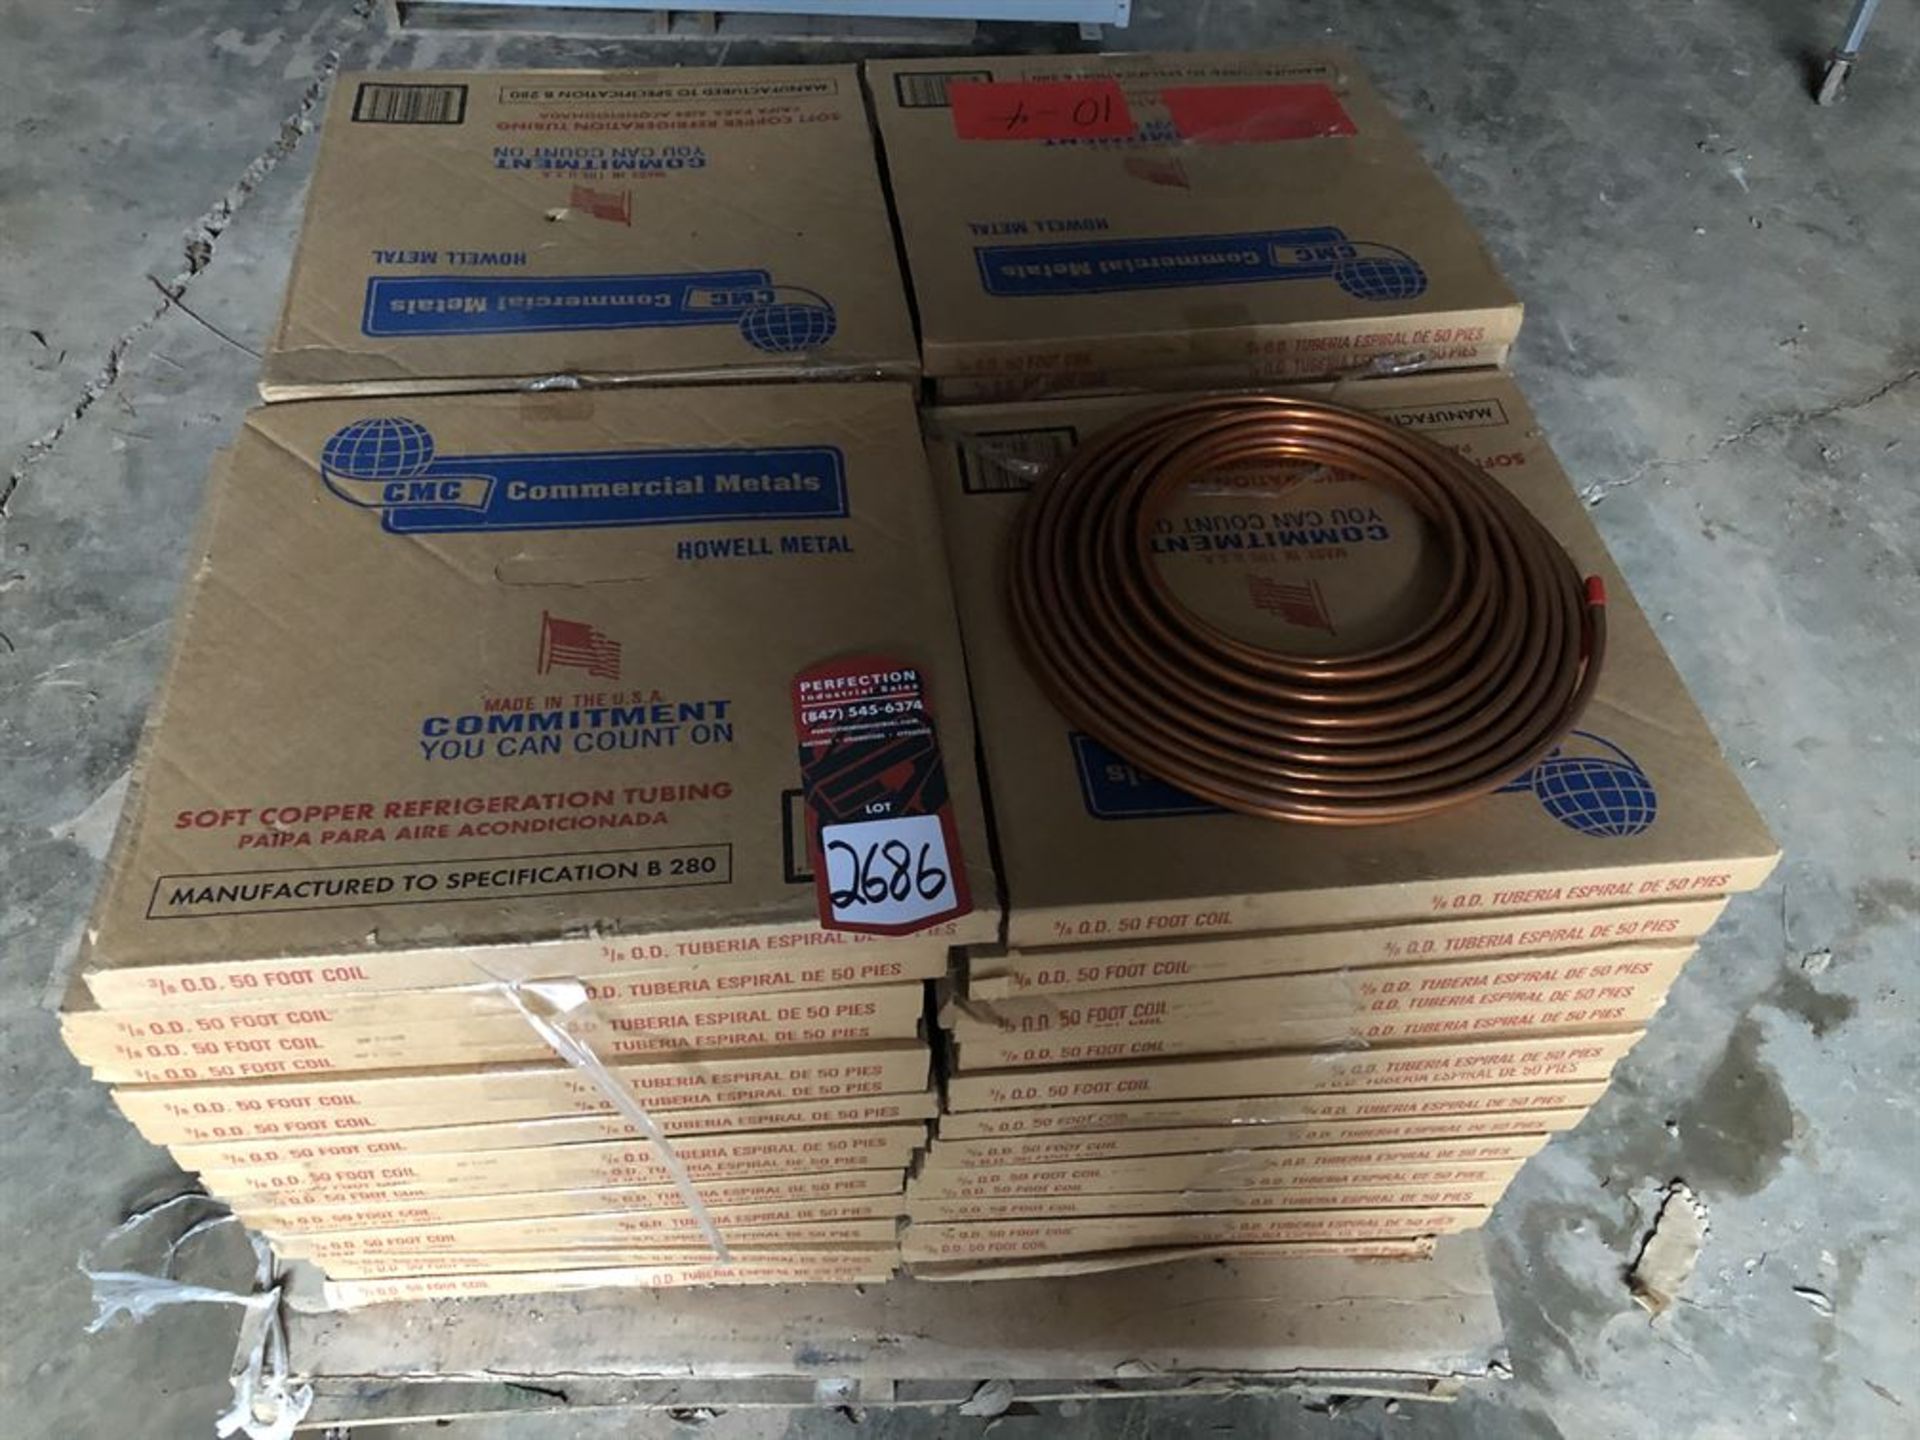 Lot Comprising of (80) Boxes of Soft Copper Refrigeration Tubing (Location: Bee Hive)